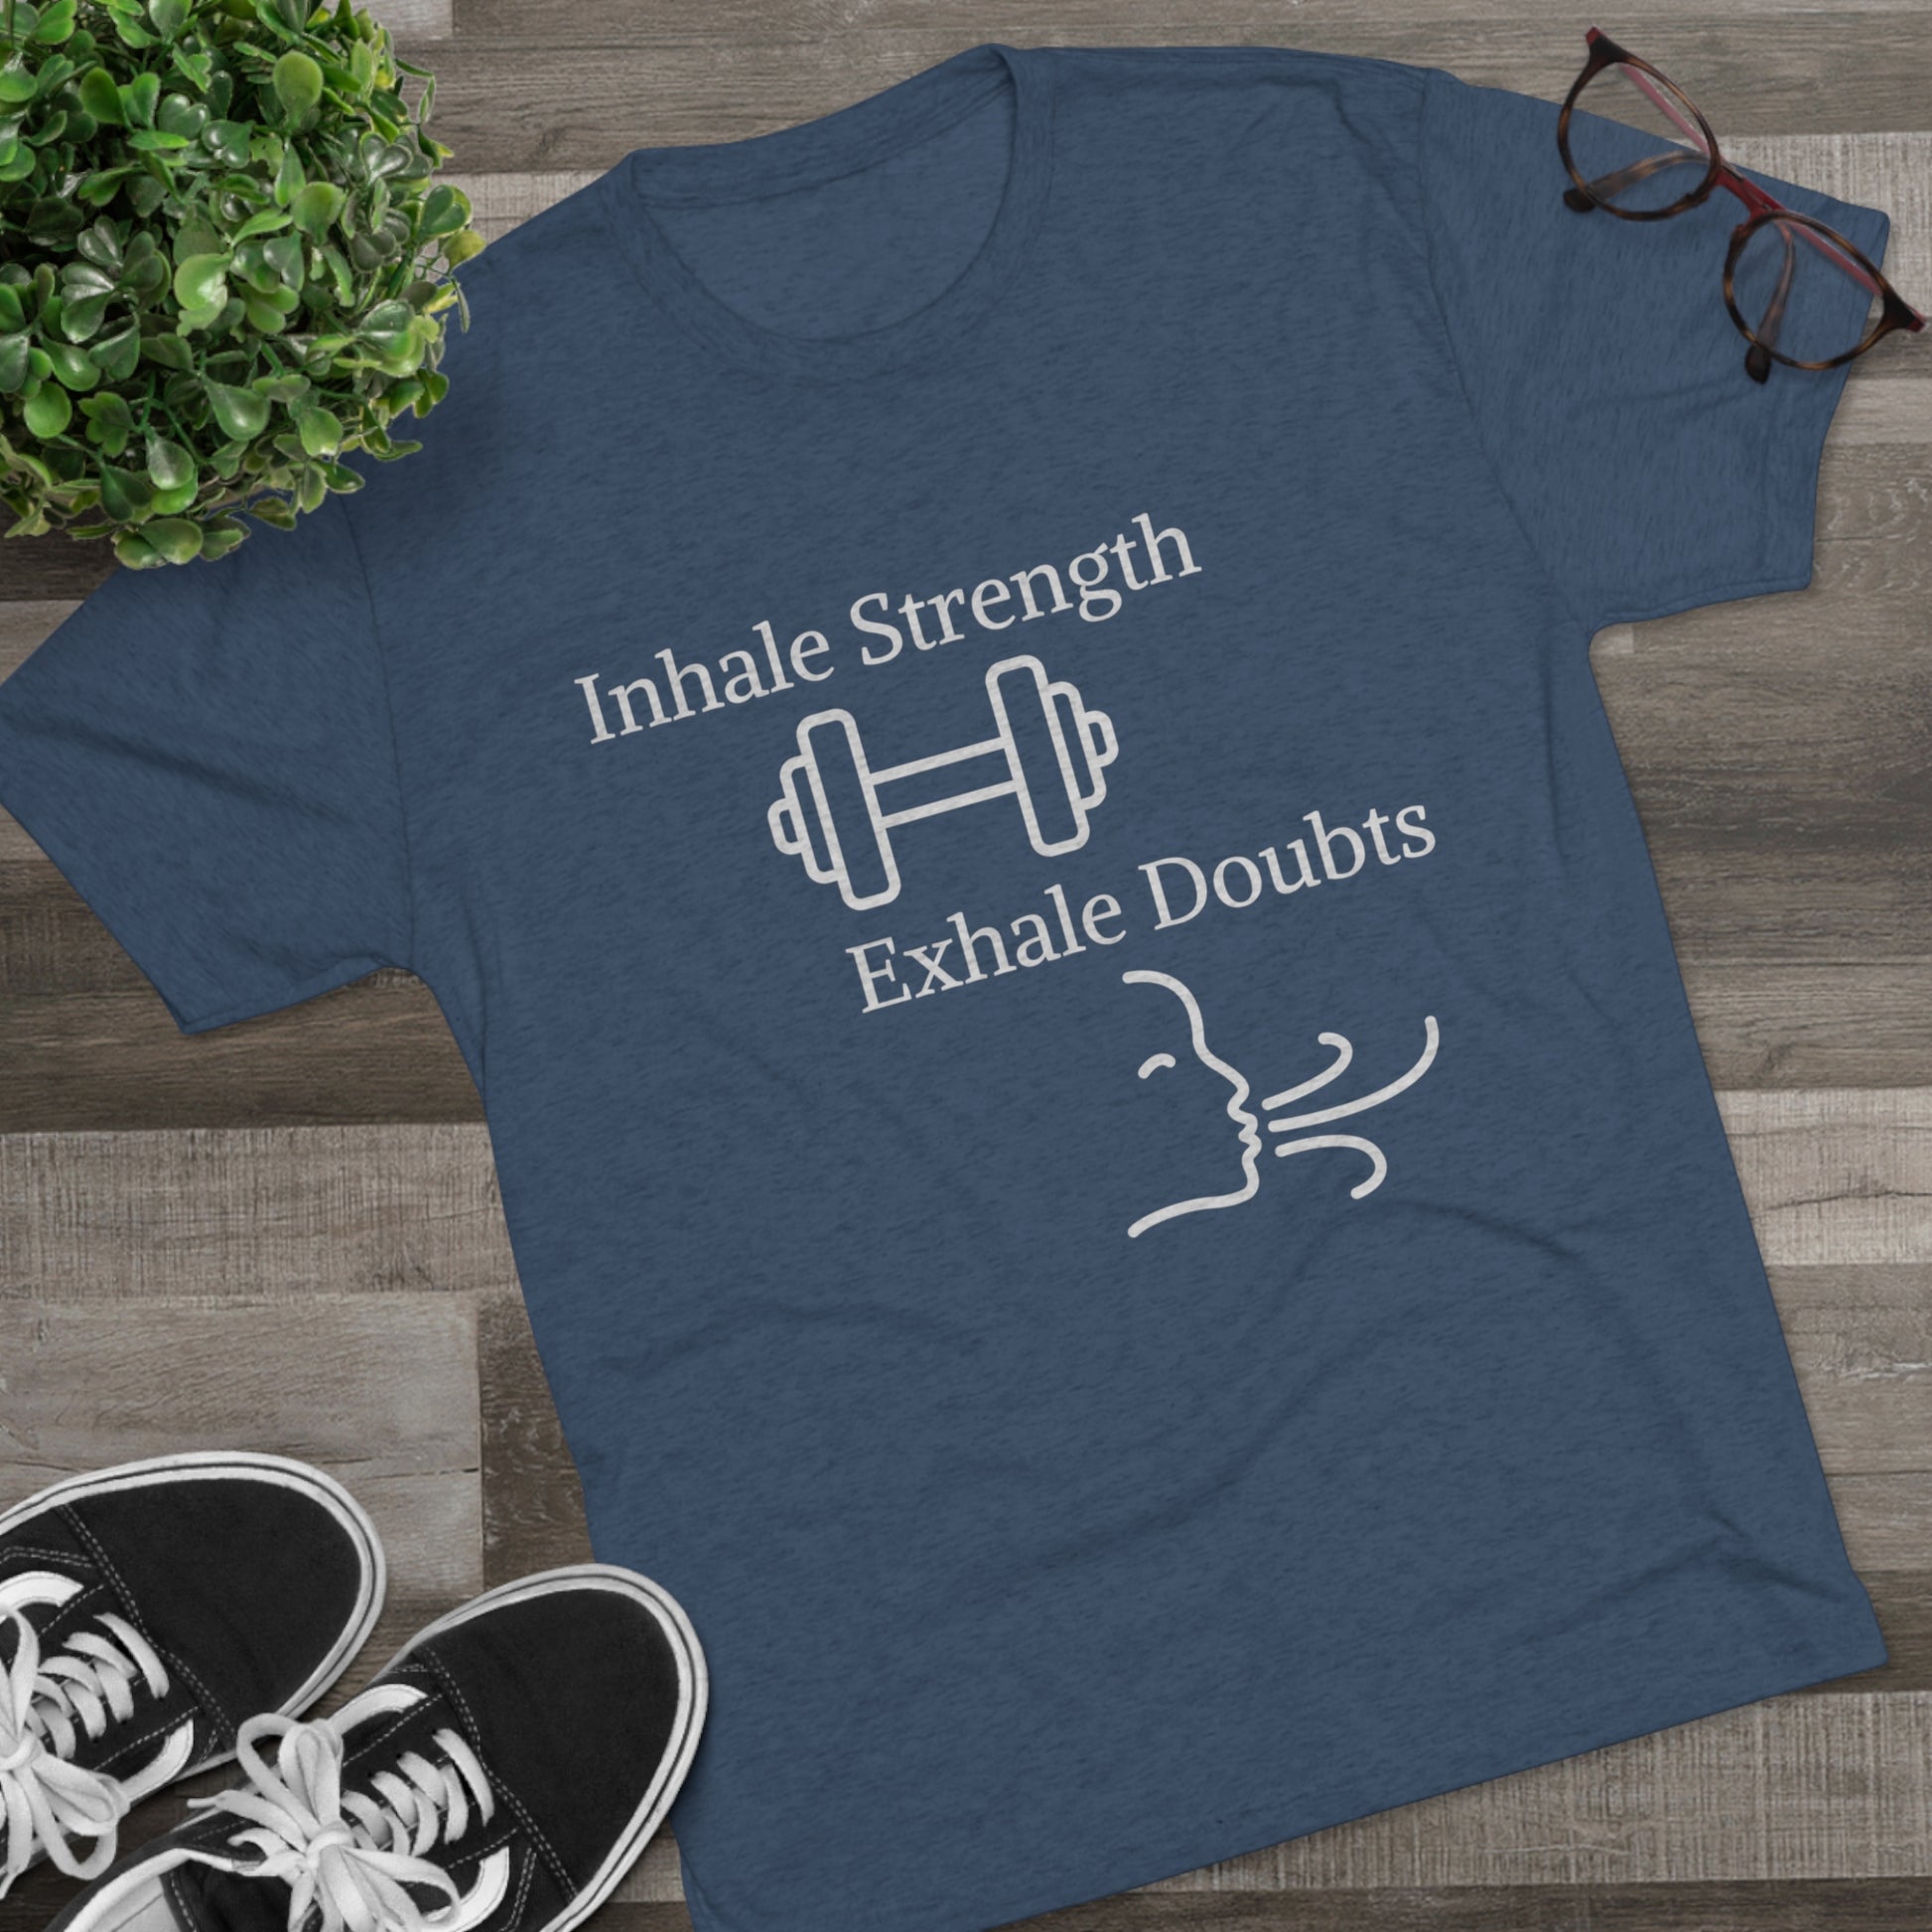 A Printify Inhale Strength Exhale Doubt w Images - Unisex Tri-Blend Crew Tee with the motivational text "inhale strength exhale doubts" and an icon of a dumbbell and wind graphic, displayed on a wooden floor next to Blue Sky Runners sneakers.